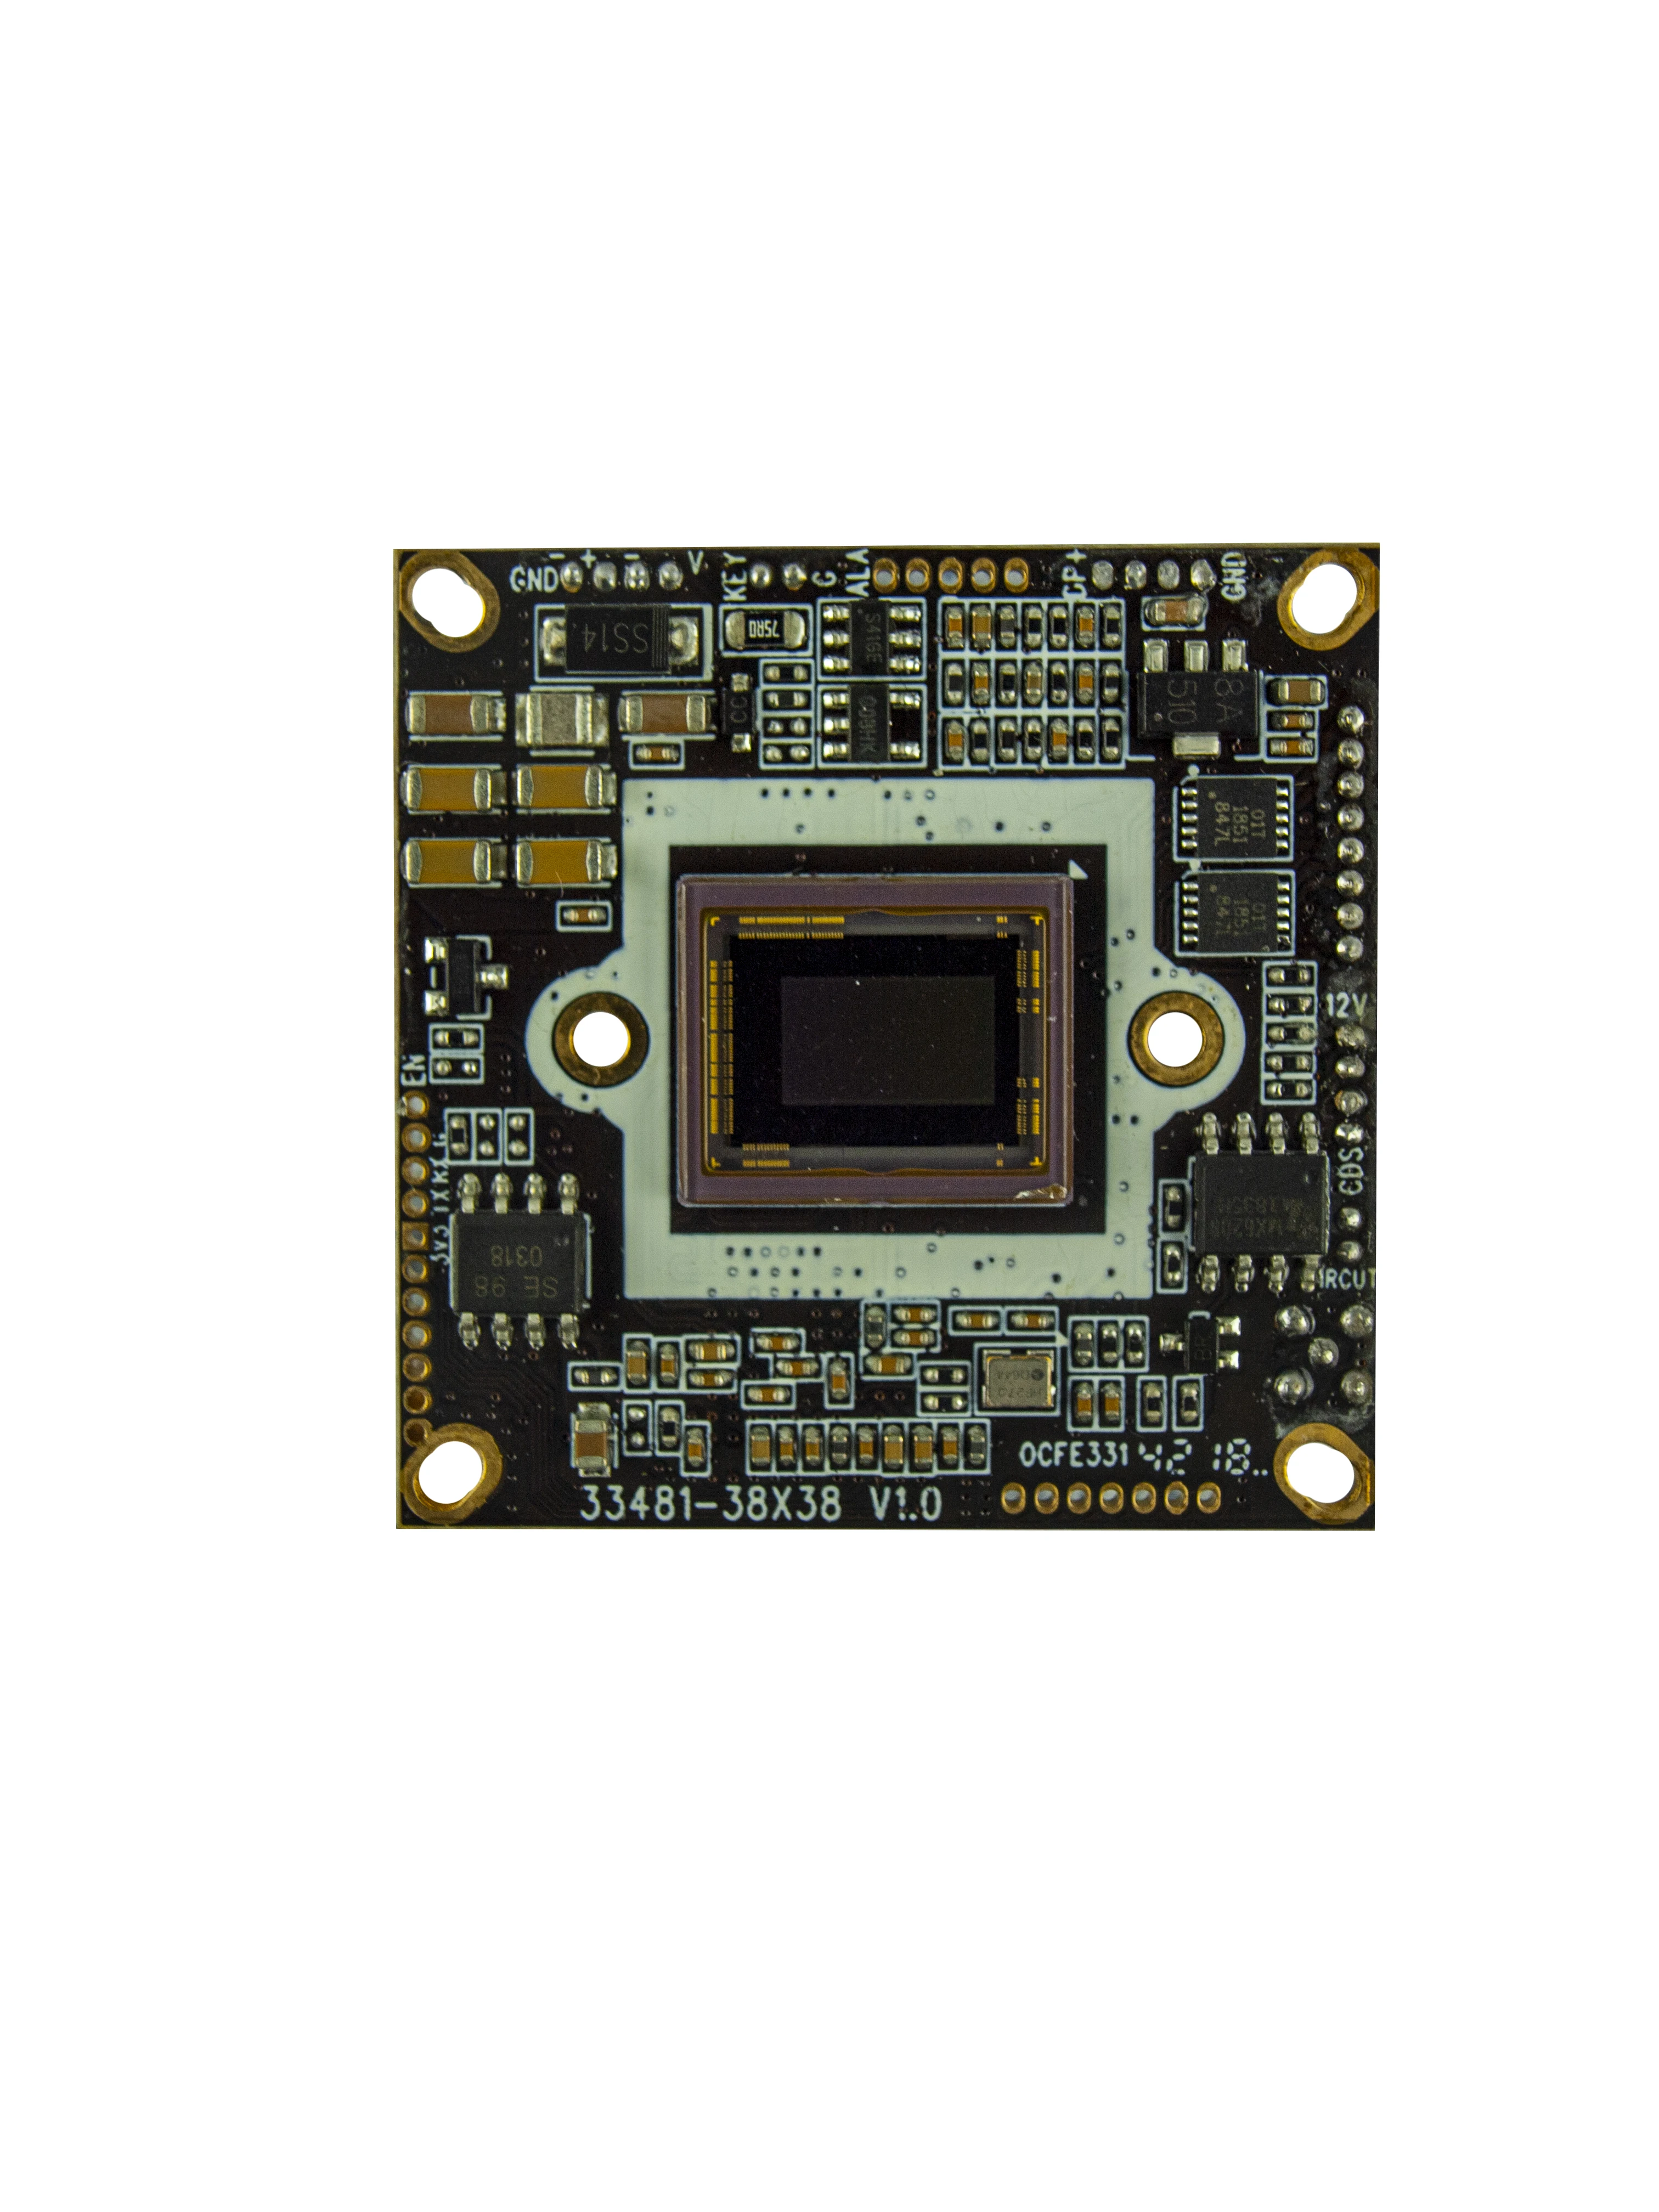 Hot Sale WDR 3D DNR 1/2.8 inch  IMX335 sensor 4mp camera pcb board for security camera